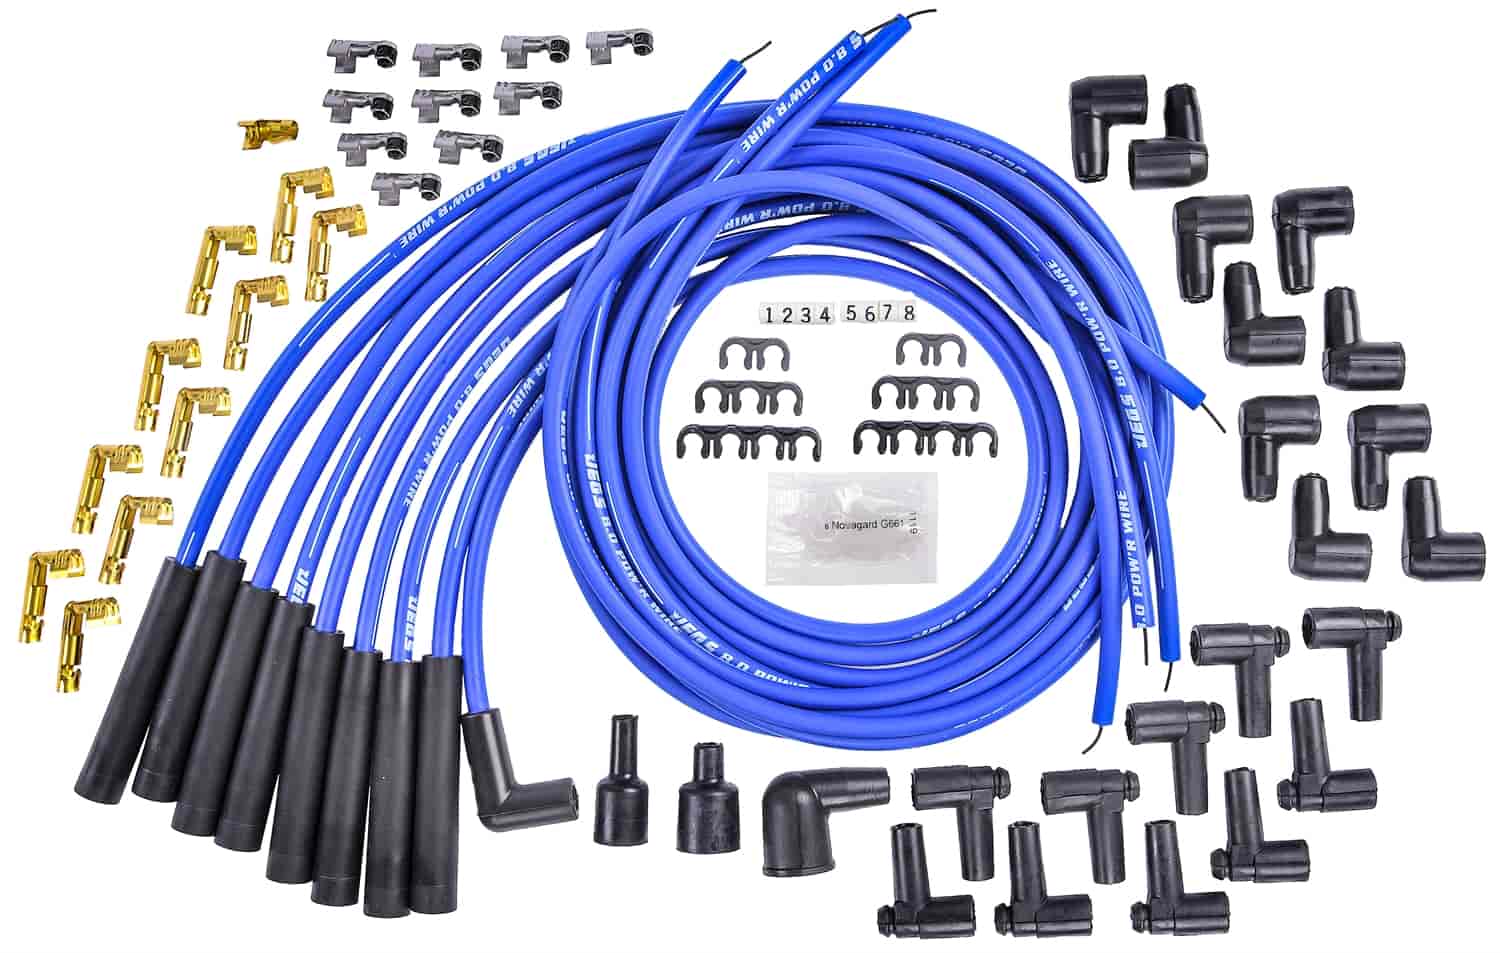 8.0mm Blue Pow'r Wires for Small Block and Big Block Chevy Over Valve Covers or Under Headers and AMC 290-401 V8 with HEI